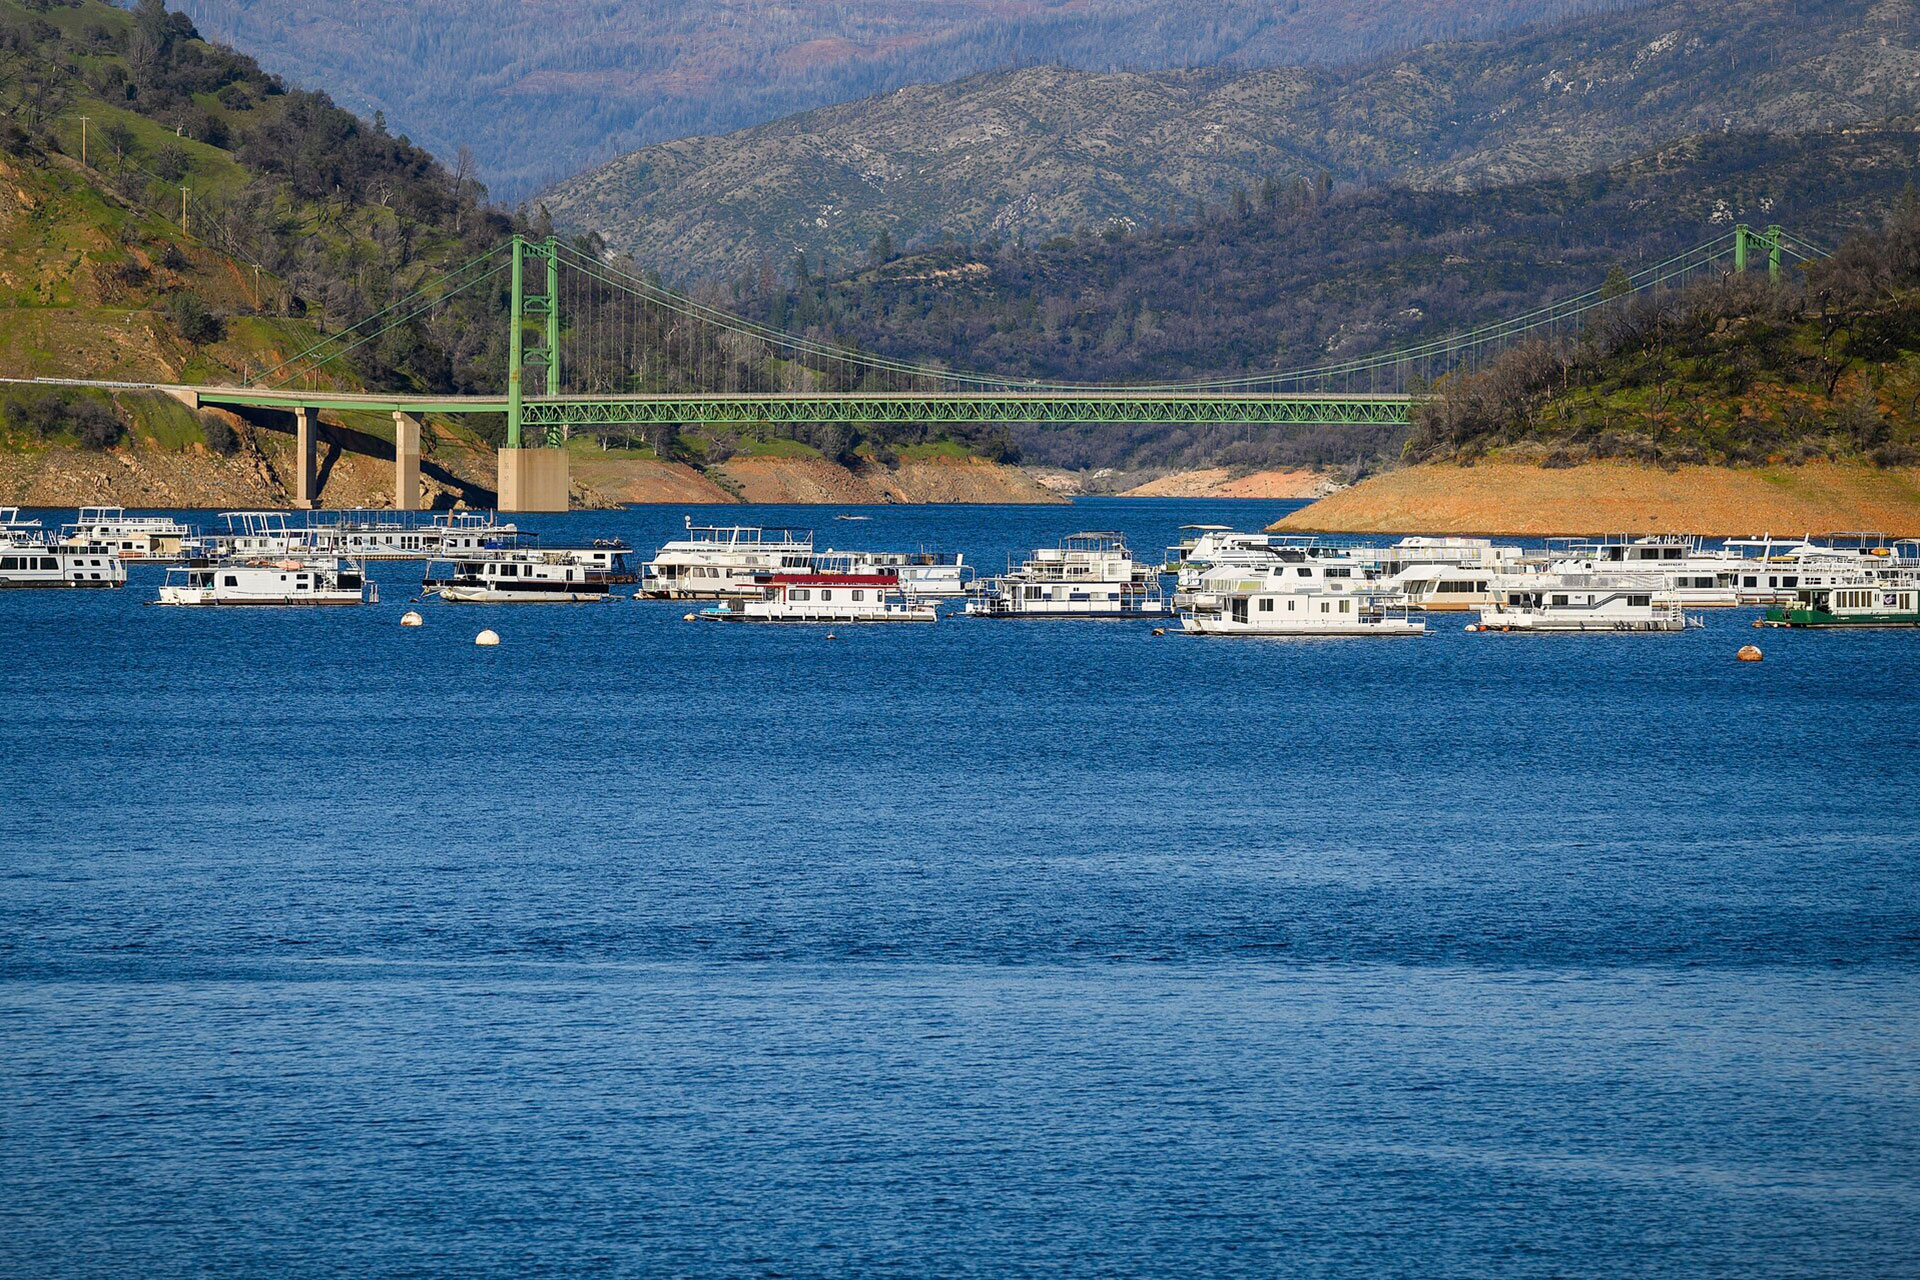 Boats on a leak with a bridge in the background.